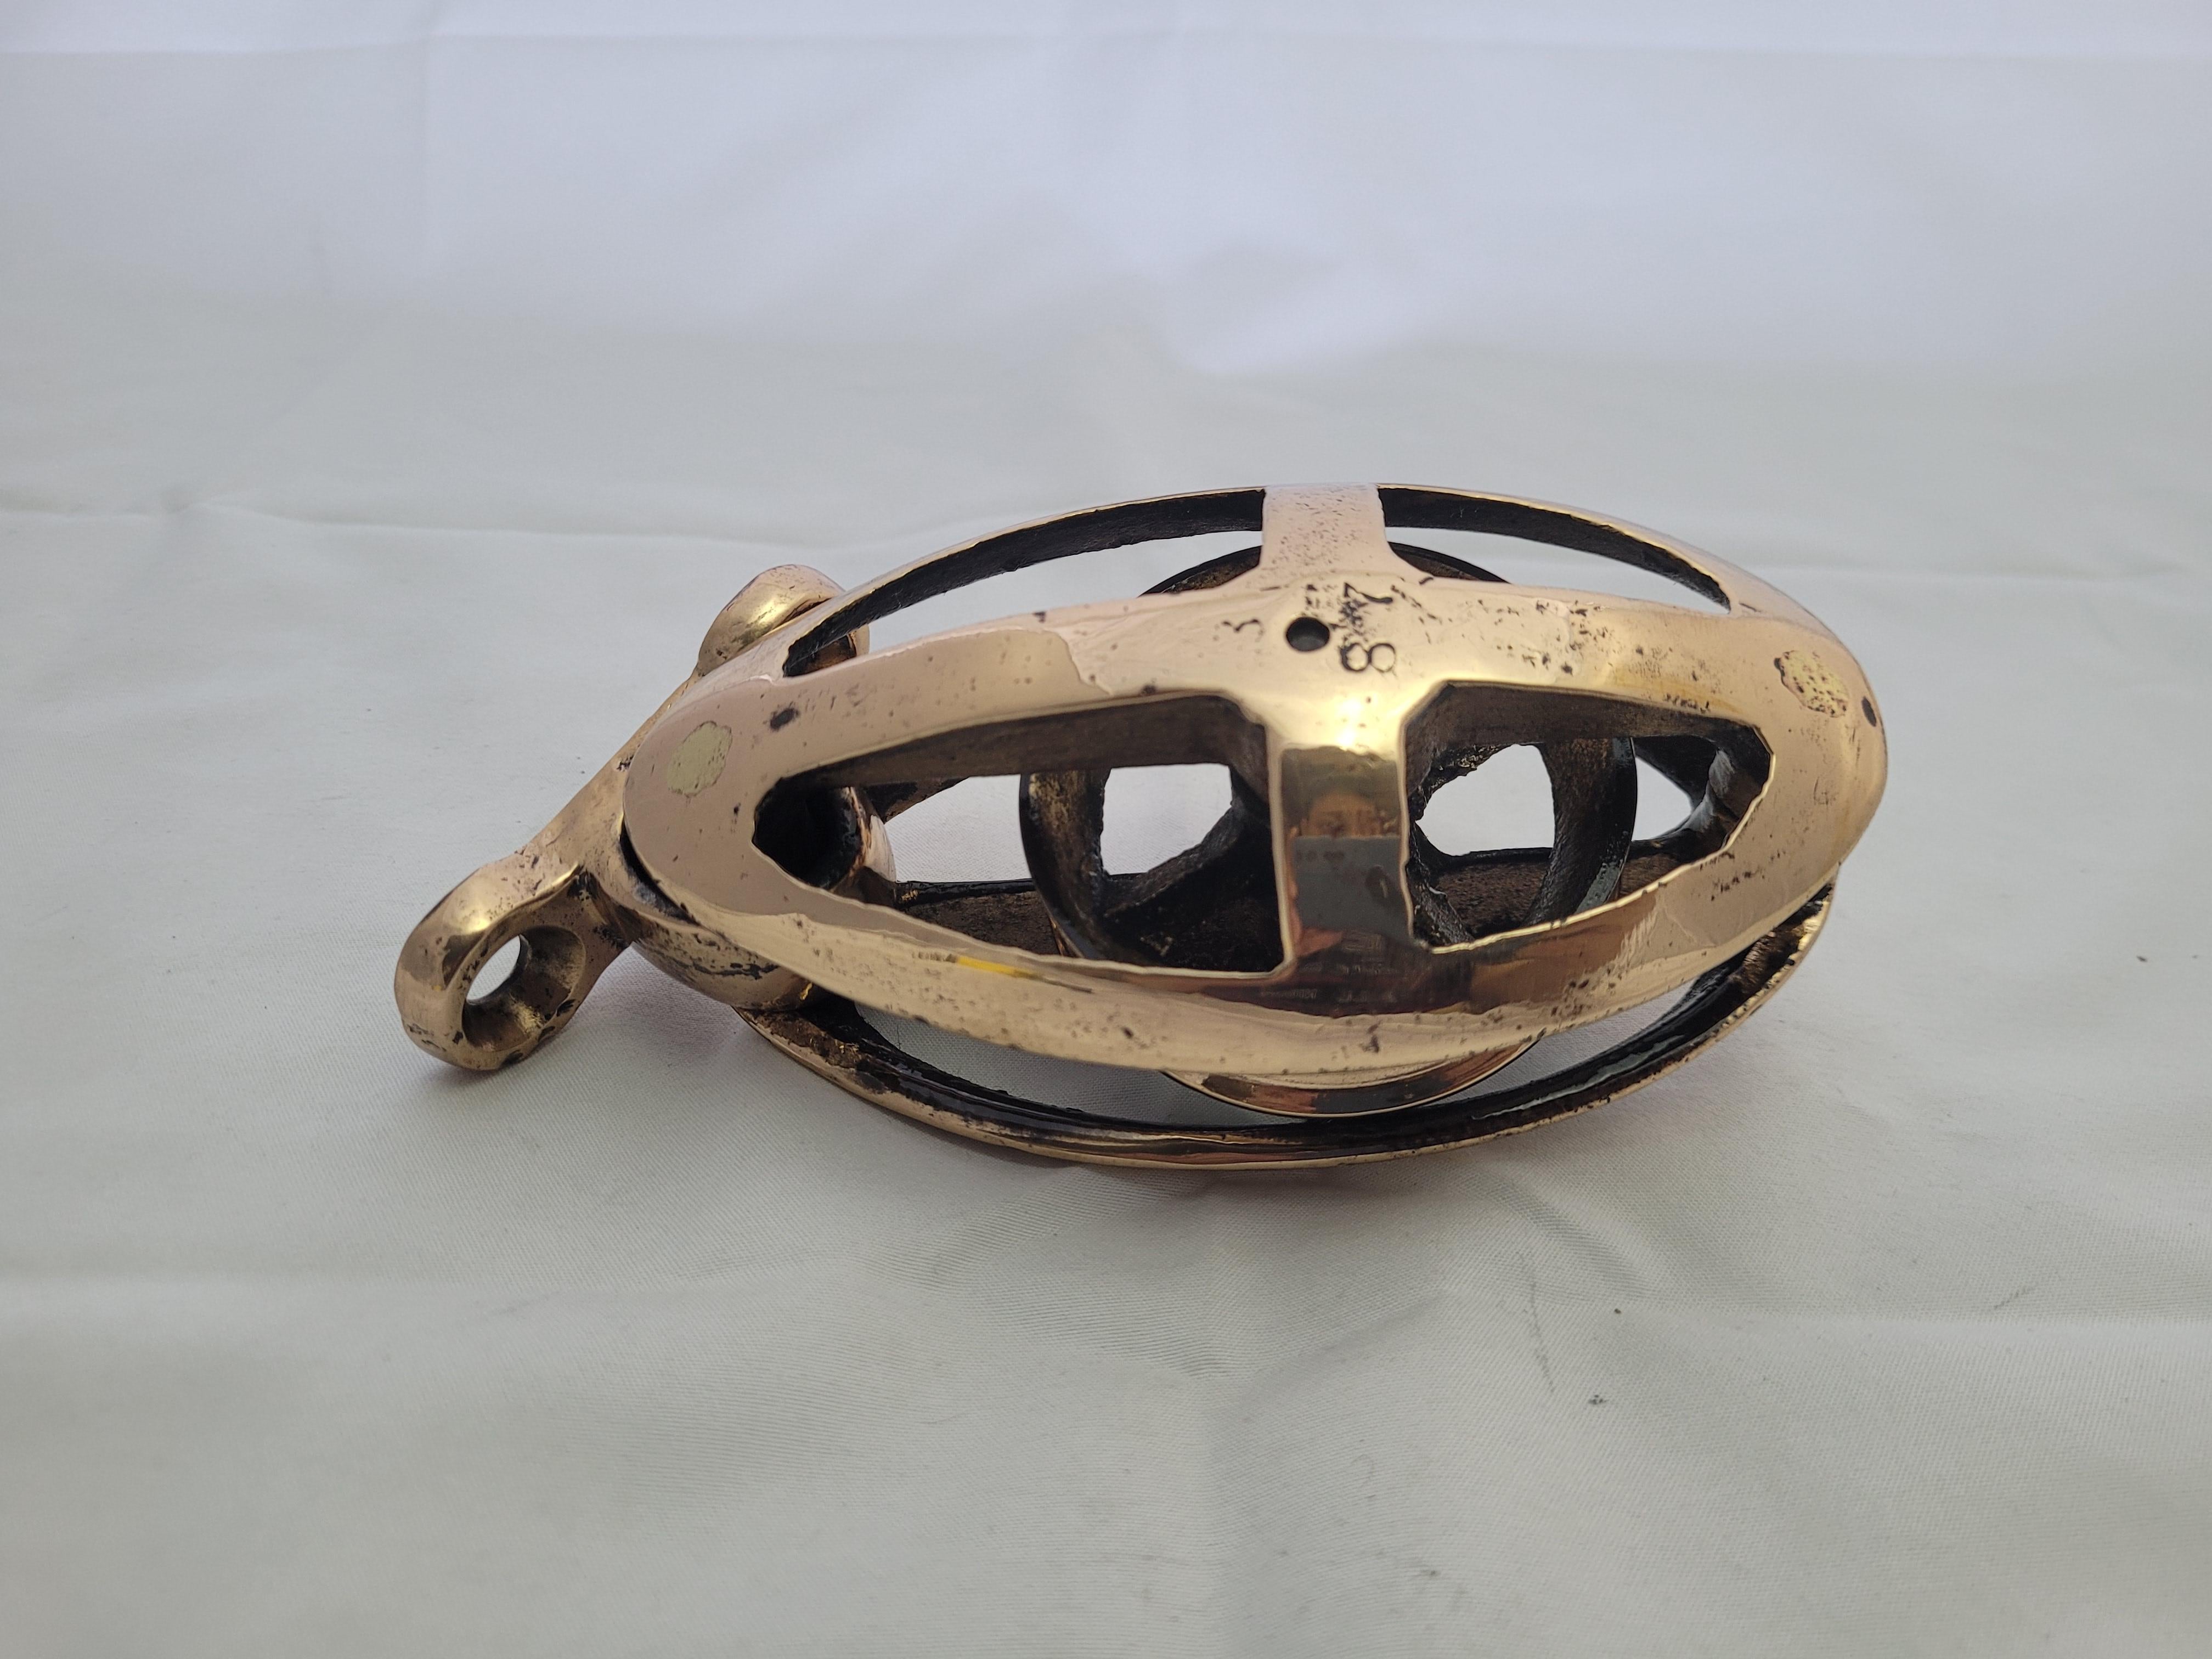 North American Herreshoff Brass Yacht Pulley from 1887